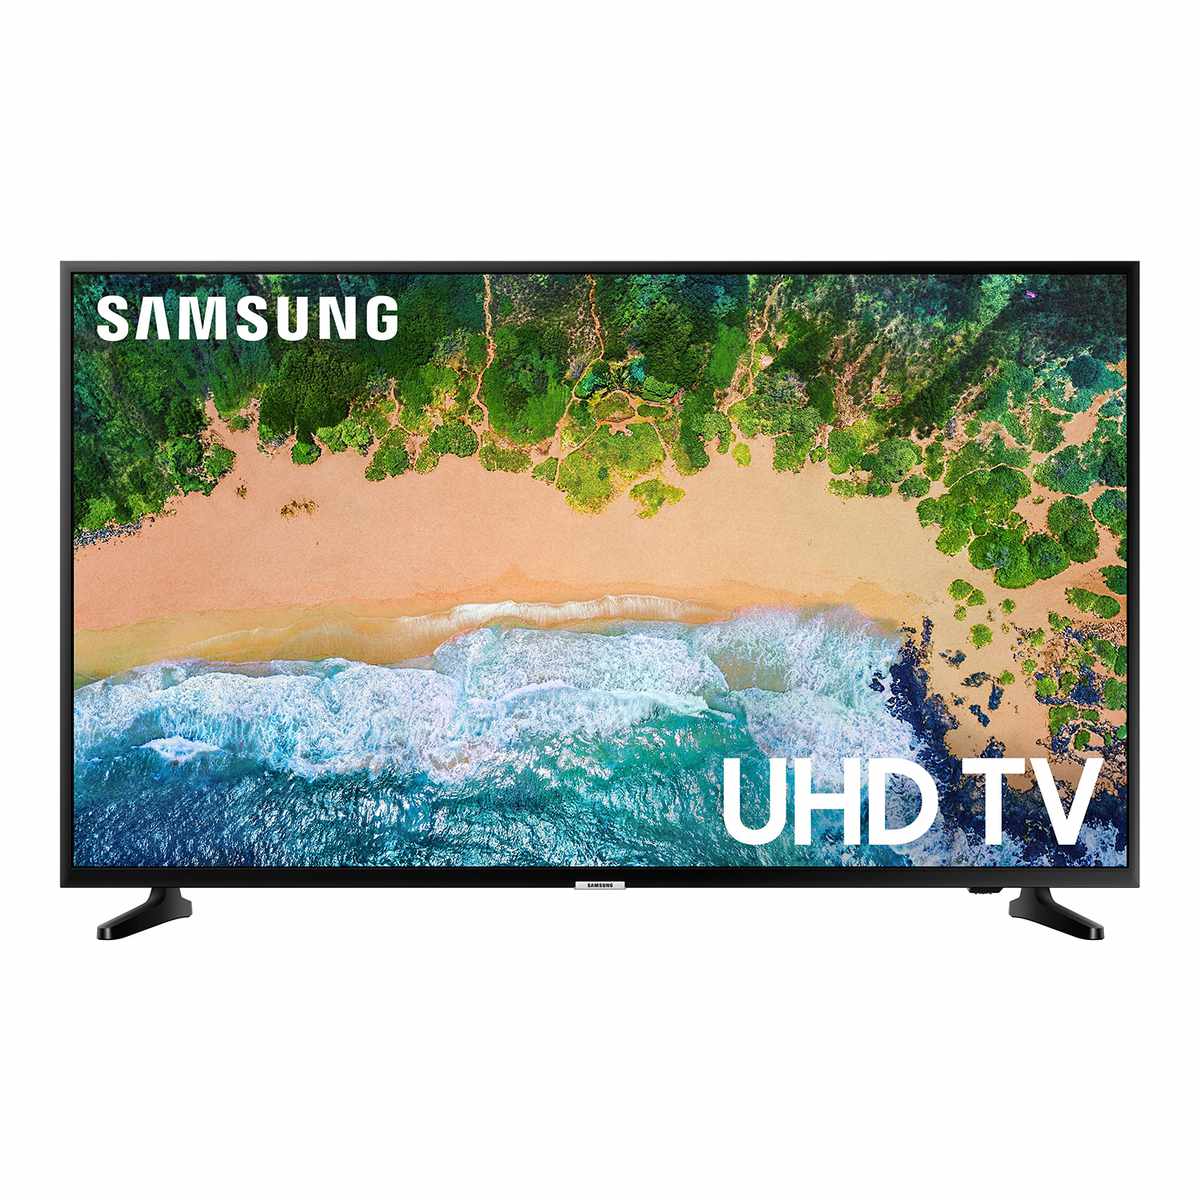 SAMSUNG 65" Class 4K UHD 2160p LED Smart TV with HDR